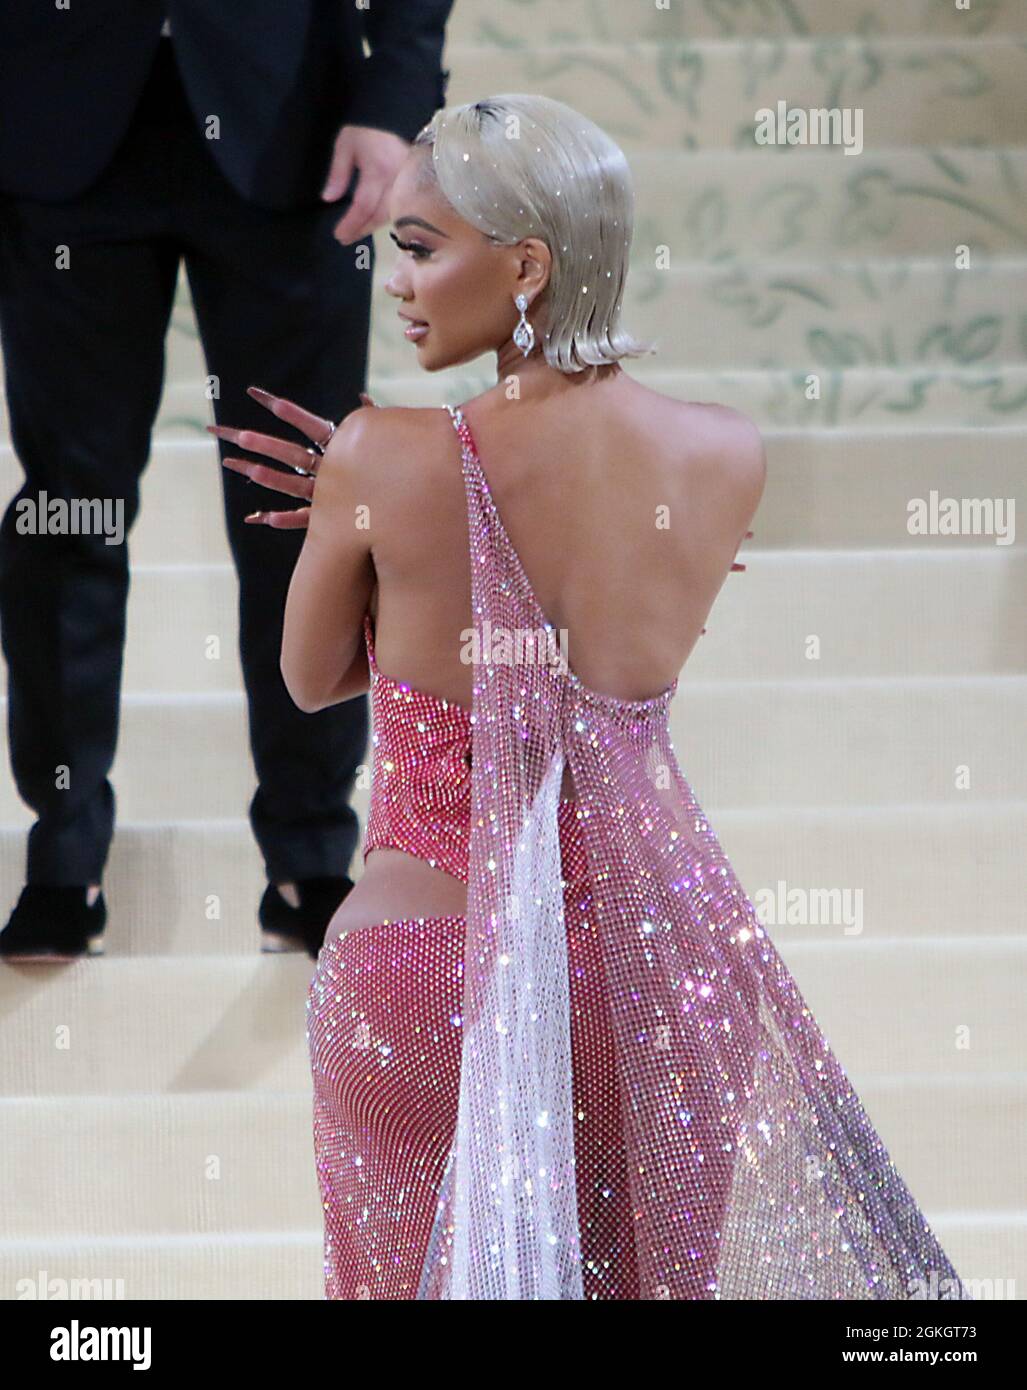 September 13, 2021.Saweetie attend The 2021 Met Gala Celebrating In America: A Lexicon Of Fashion atMetropolitan Museum of Art in New York September 13, 2021 Credit:RW/MediaPunch Stock Photo